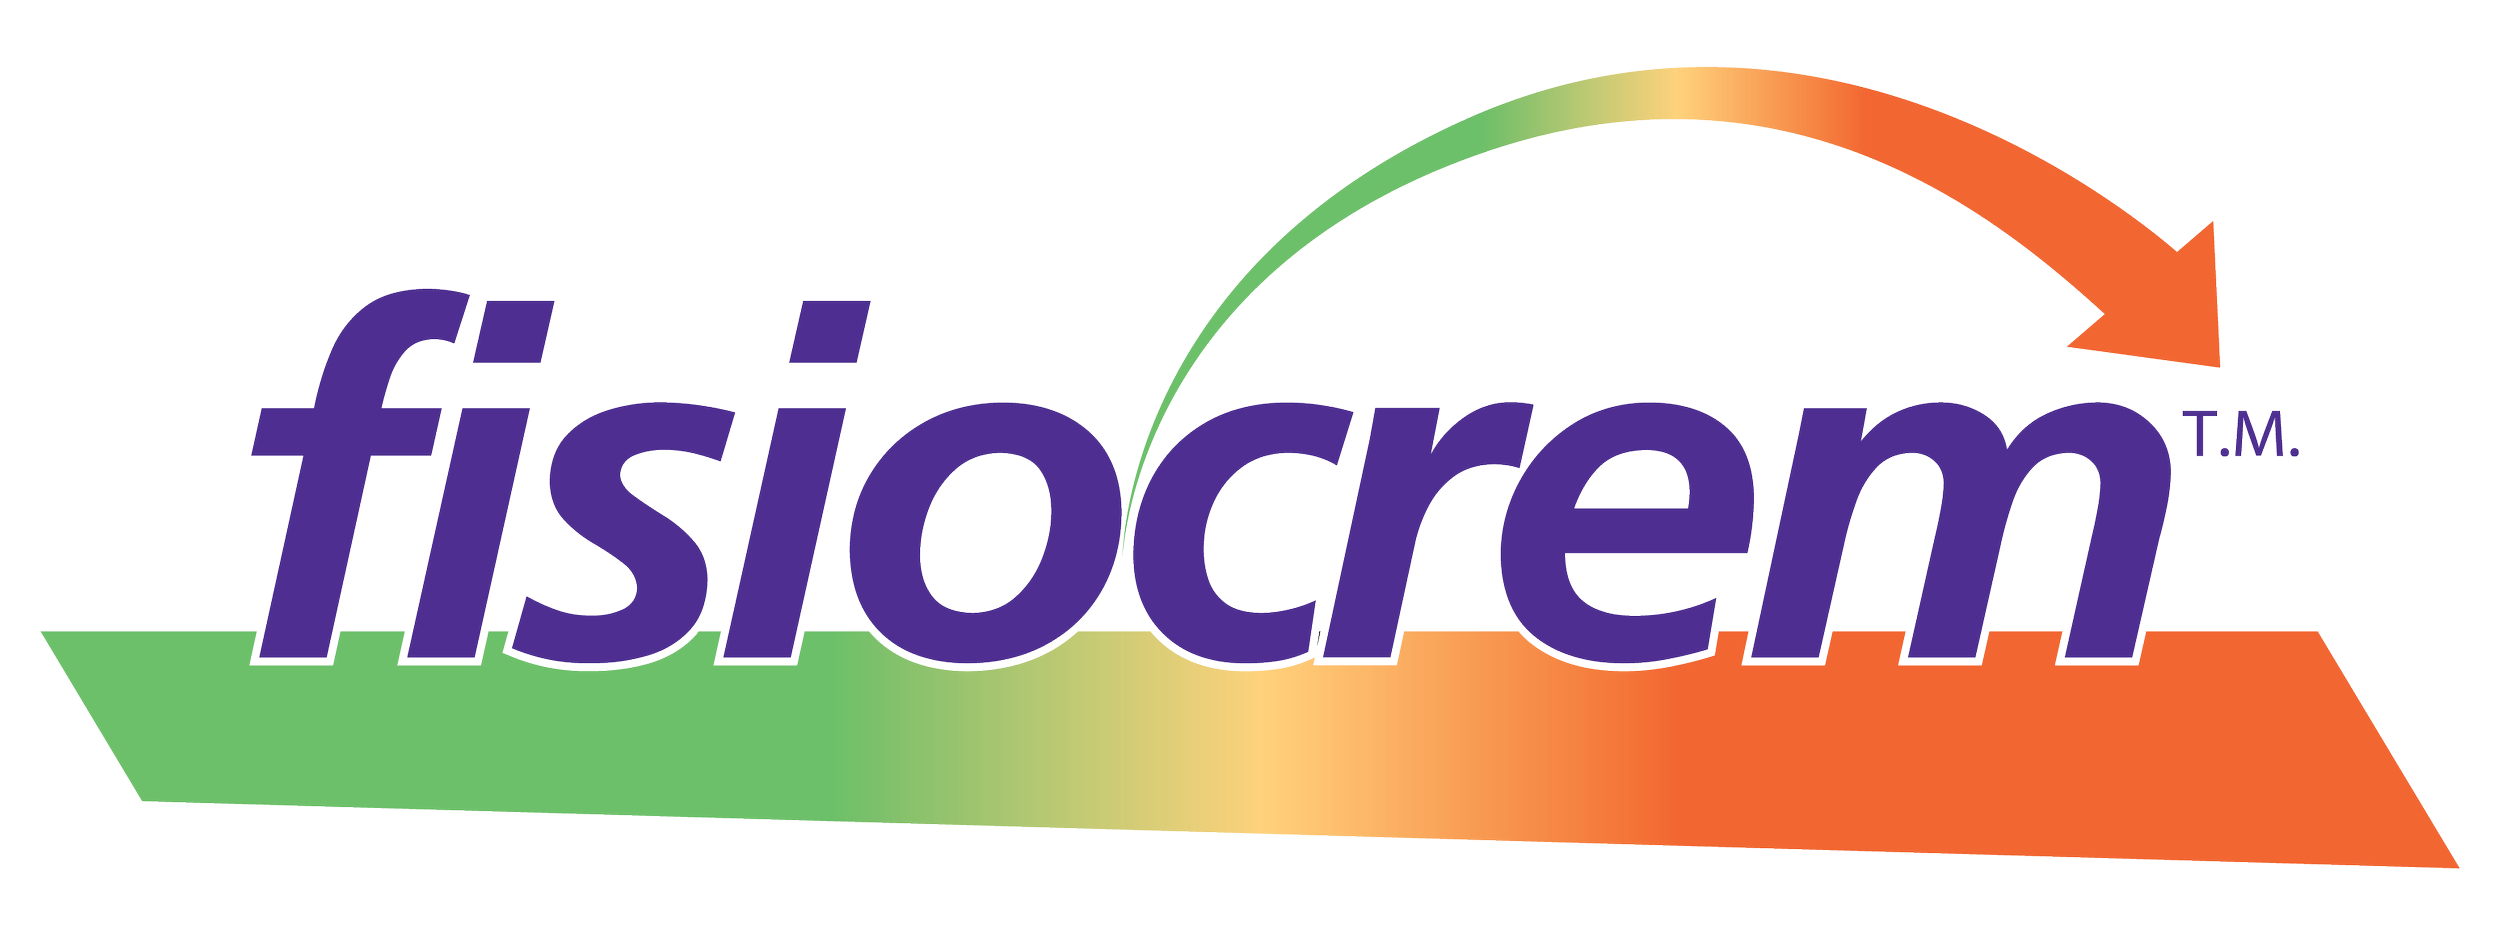 Primary logo - fisiocrem.png